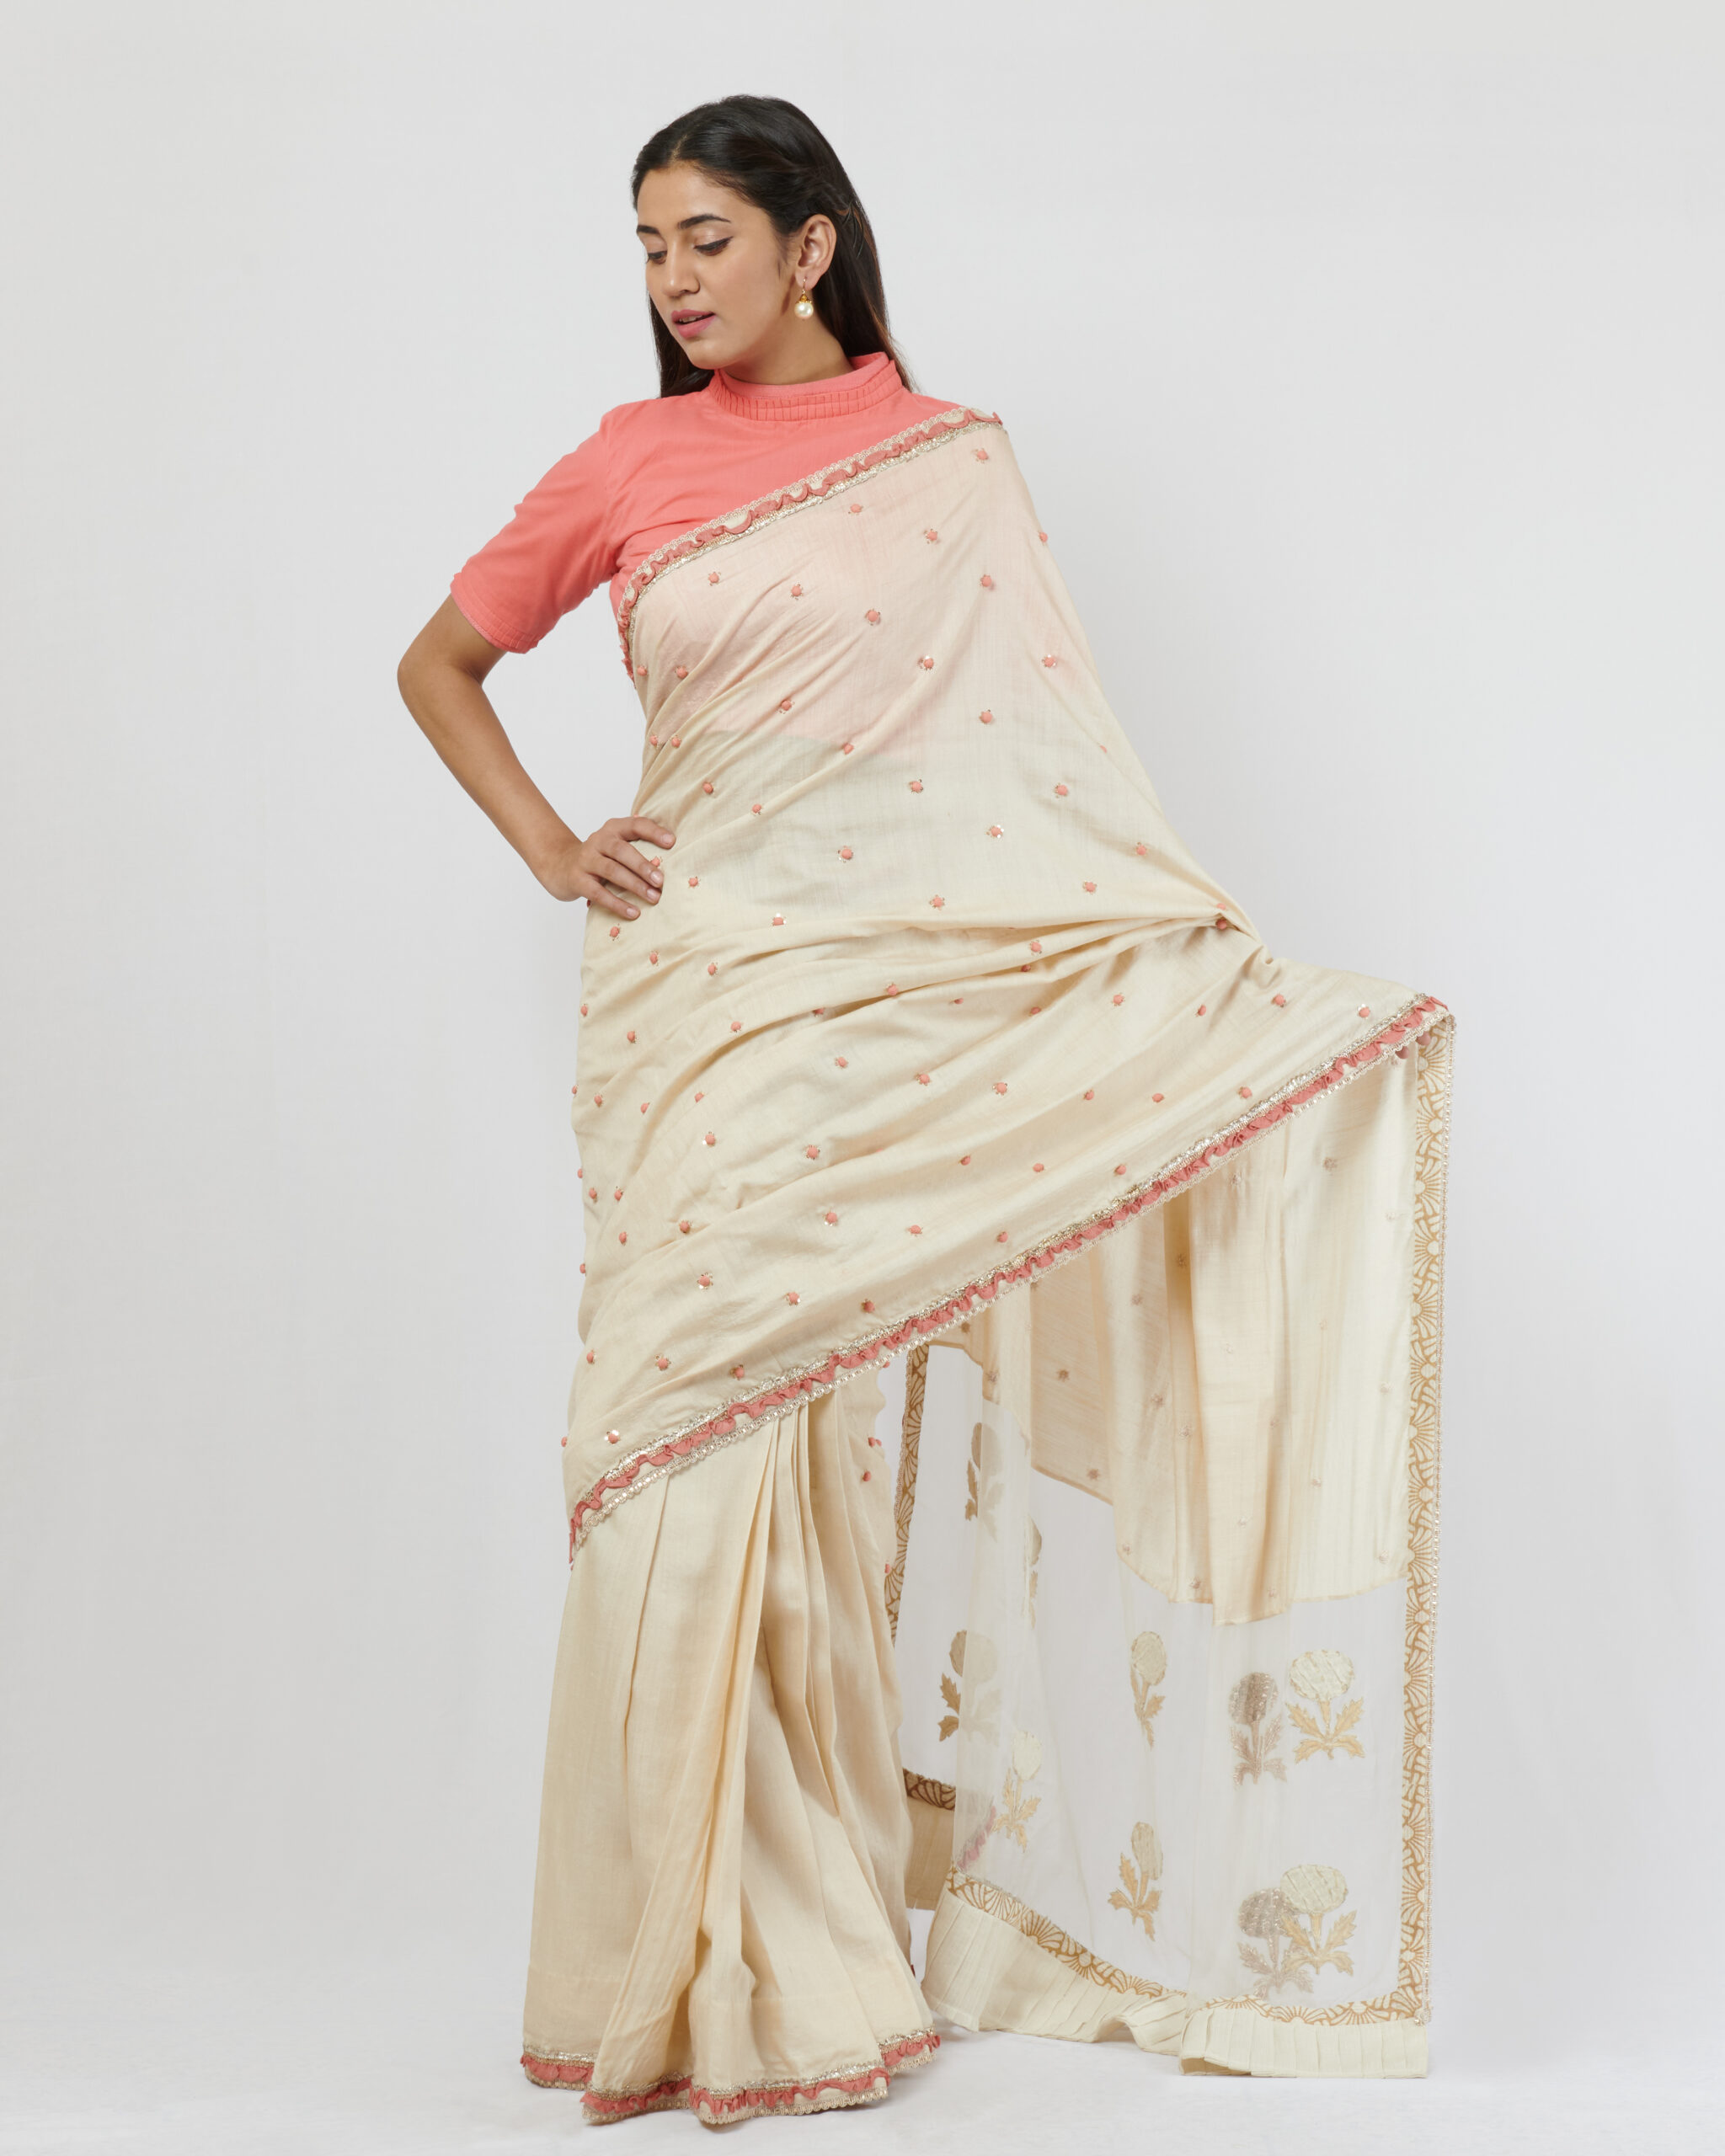 Soft tussar silk sari with multiple fine borders and peach hand crafted potlis all over in the second half of the sari with an organza pallu